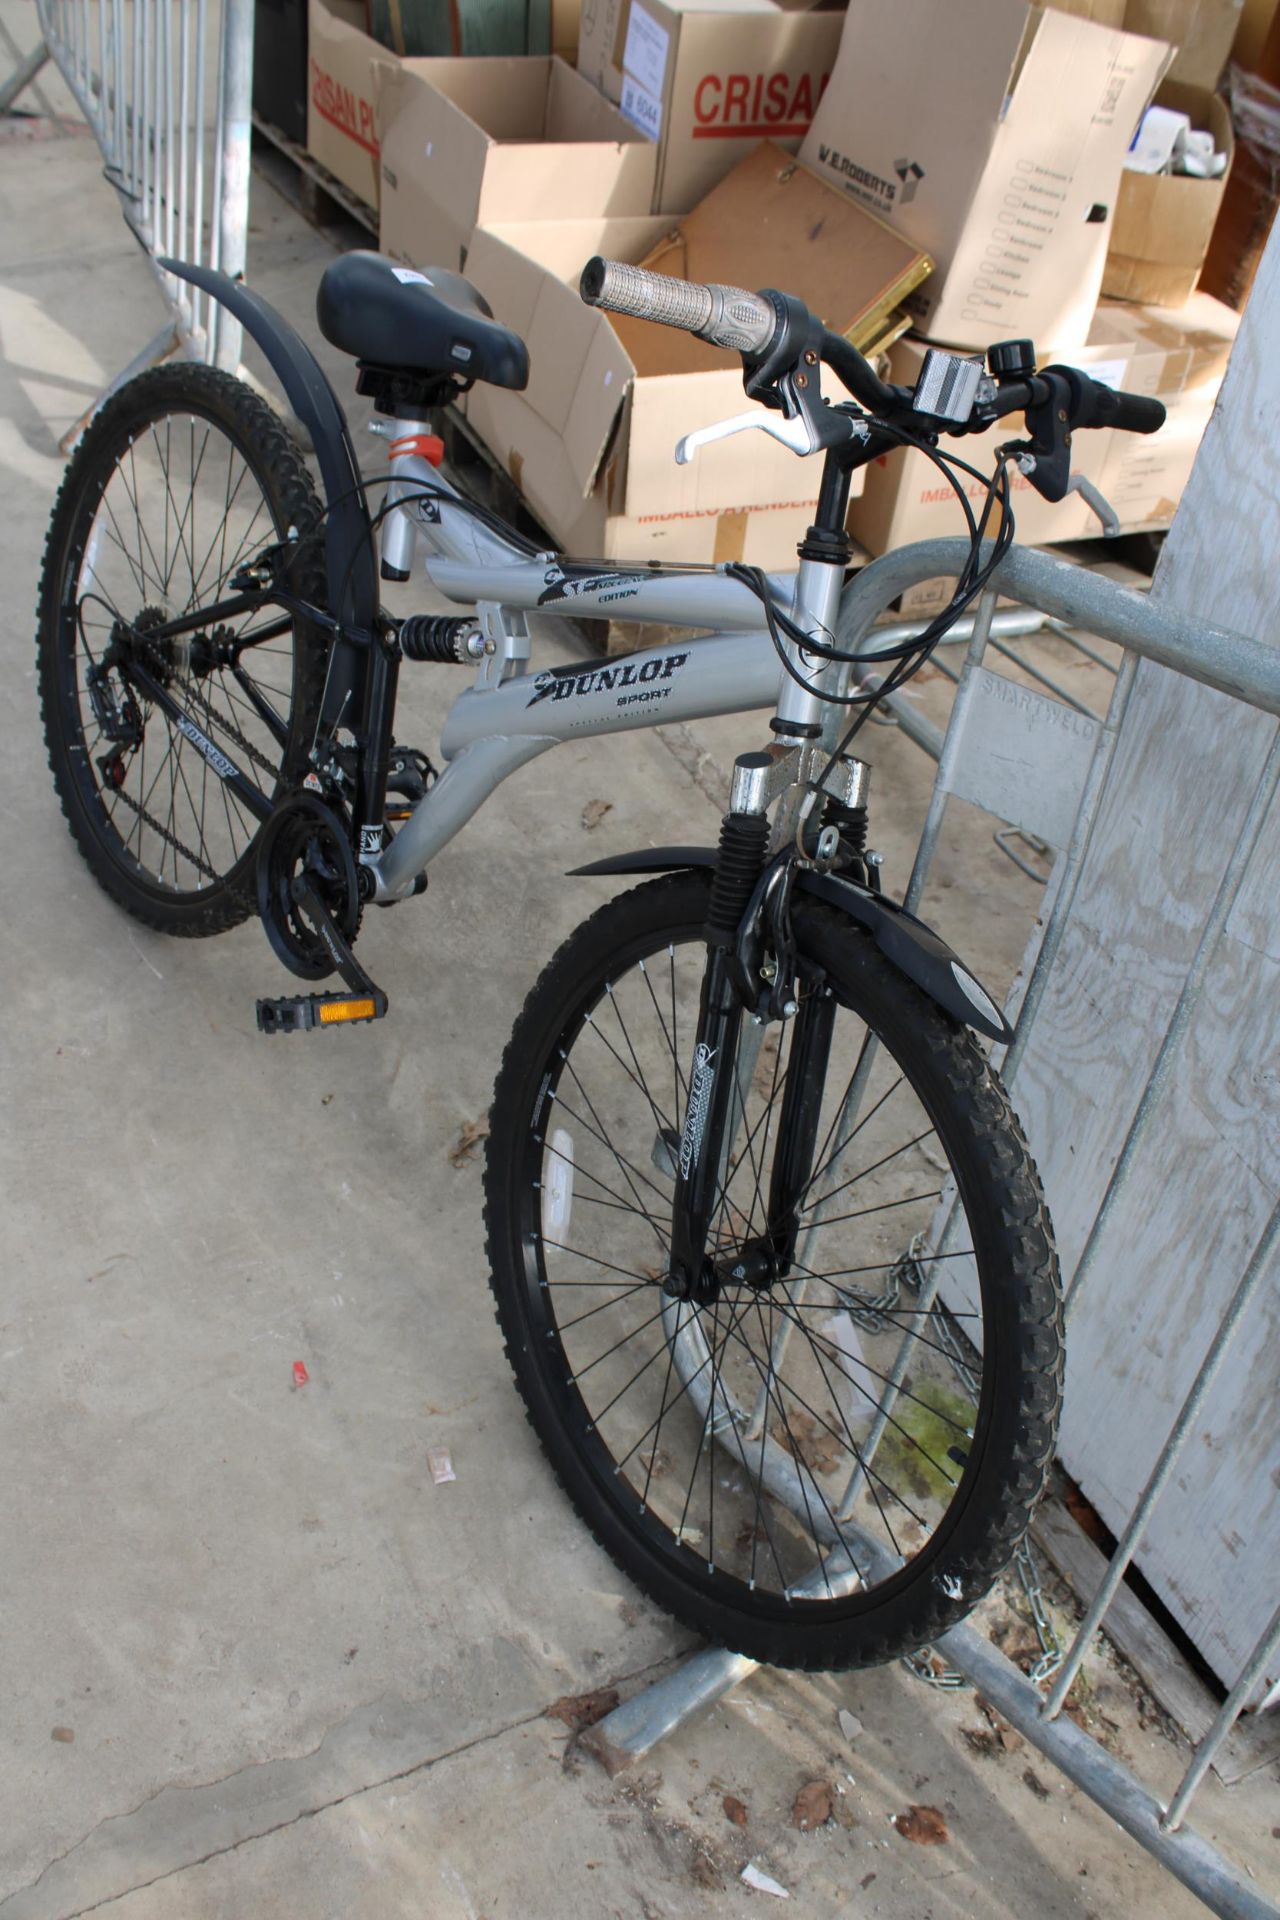 A DUNLOP SPECIAL EDITION MOUNTAIN BIKE WITH FRONT AND REAR SUSPENSION AND 18 SPEED GEAR SYSTEM - Image 4 of 4